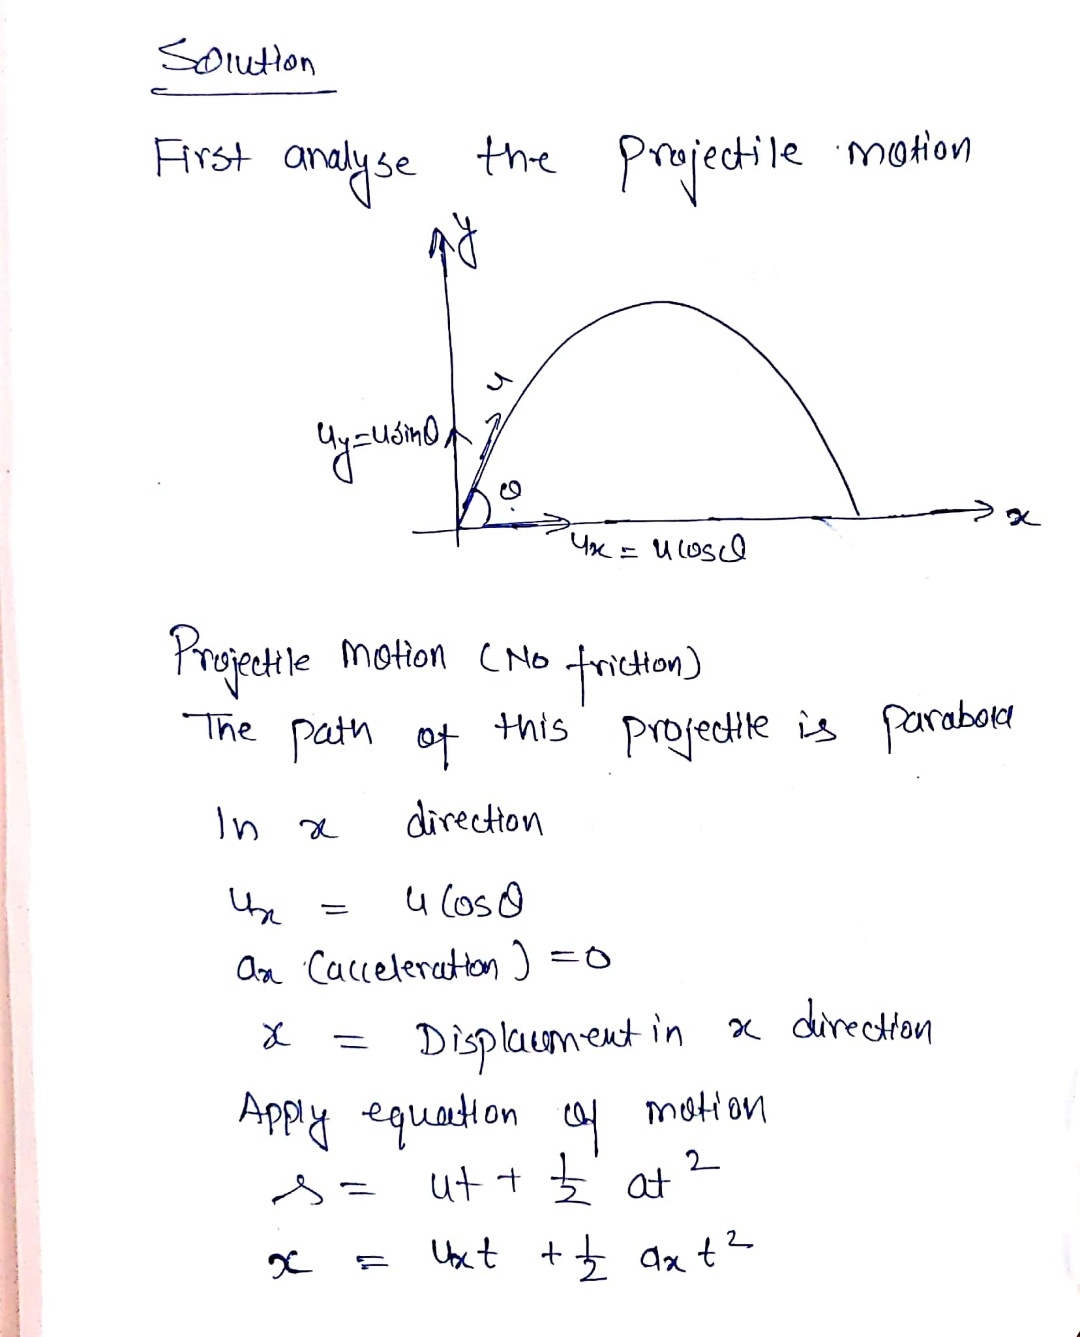 derive equation five for diffraction angle